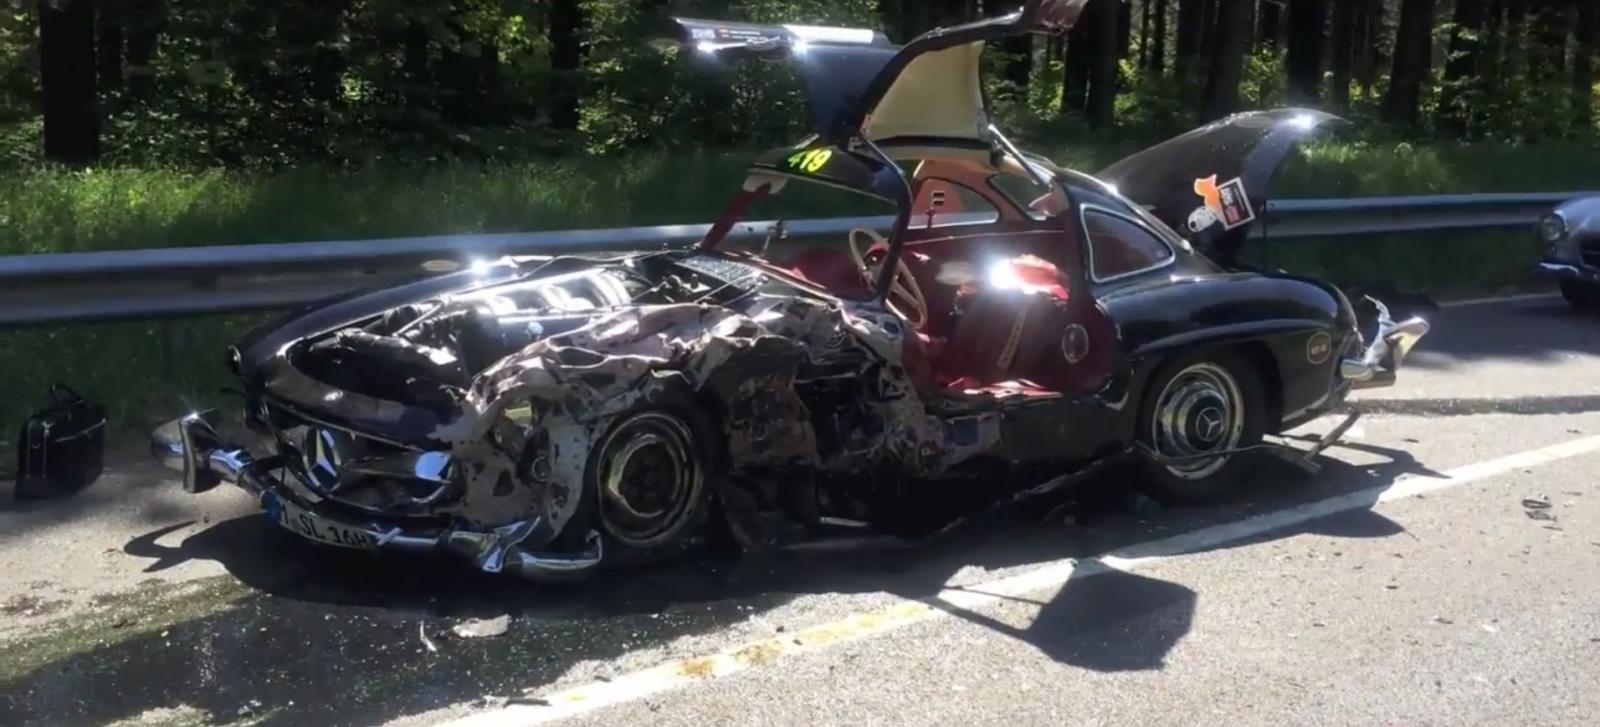 mille miglia crash at 2014 Mille Miglia: An Expensive Crash and a Supercar Party